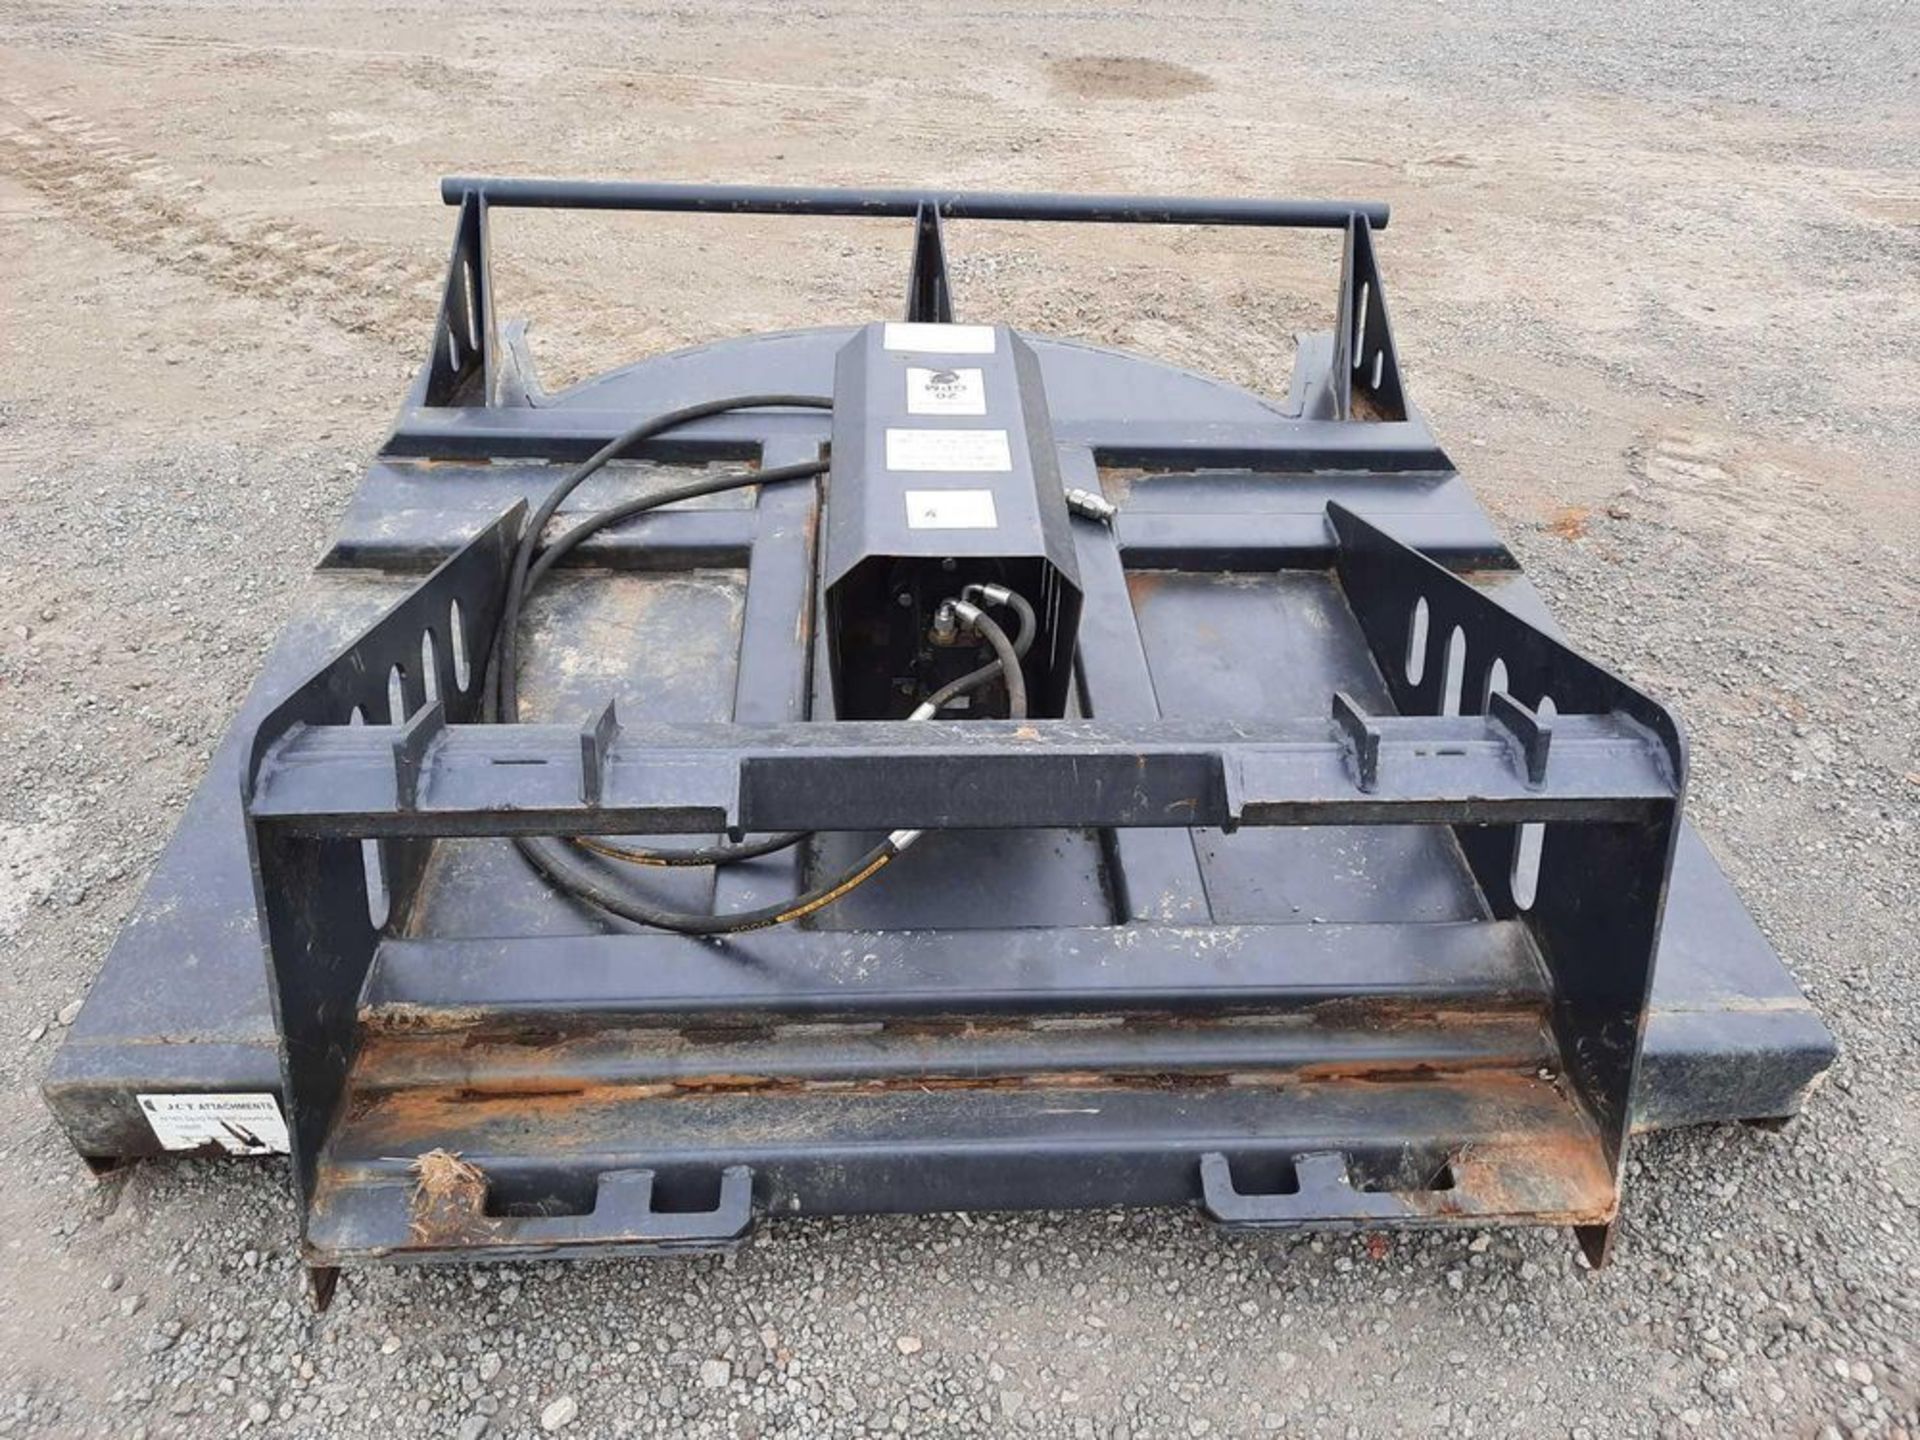 72" JCT HYDRAULIC ROTARY CUTTER ATTACHMENT FOR SKID STEER - Image 4 of 4